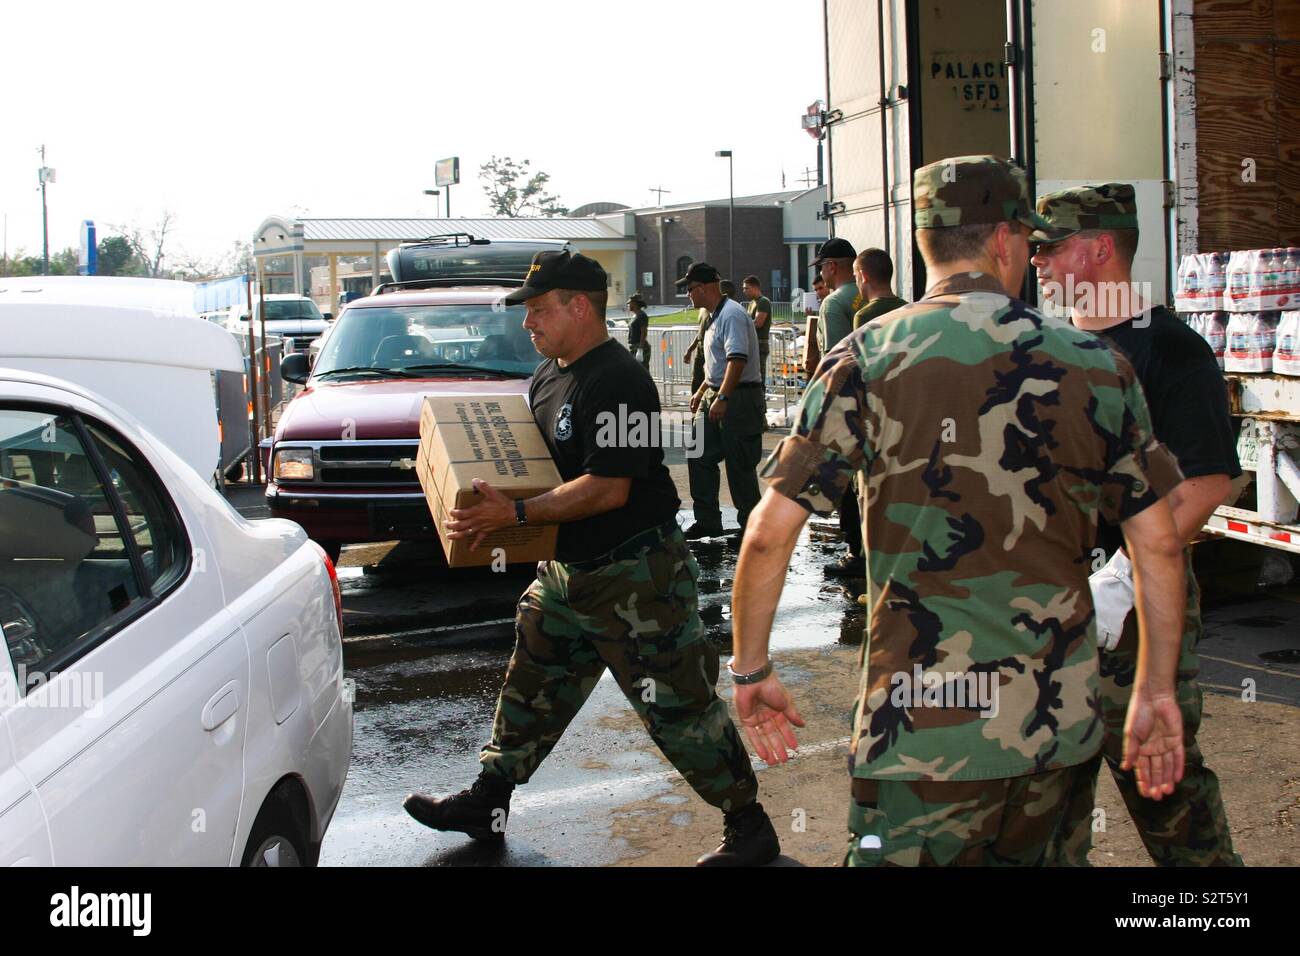 Air Force Sergeant loads emergency supplies into civilian car. Stock Photo